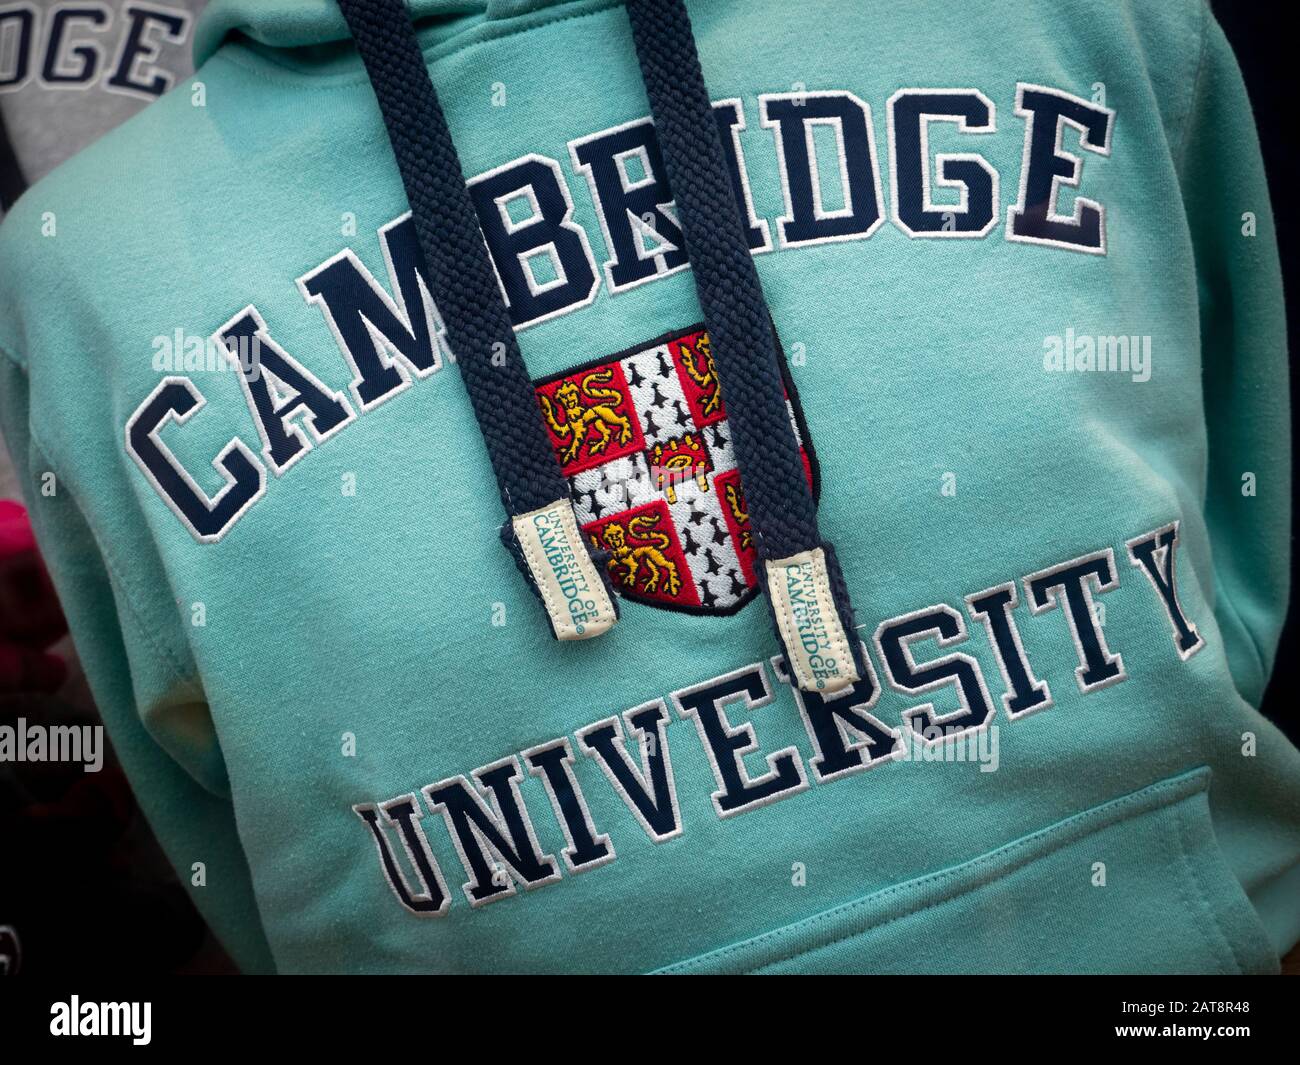 A Cambridge Blue Cambridge University sweatshirt in the shop window at Ryder and Amies a university clothes supplier in Cambridge UK Stock Photo